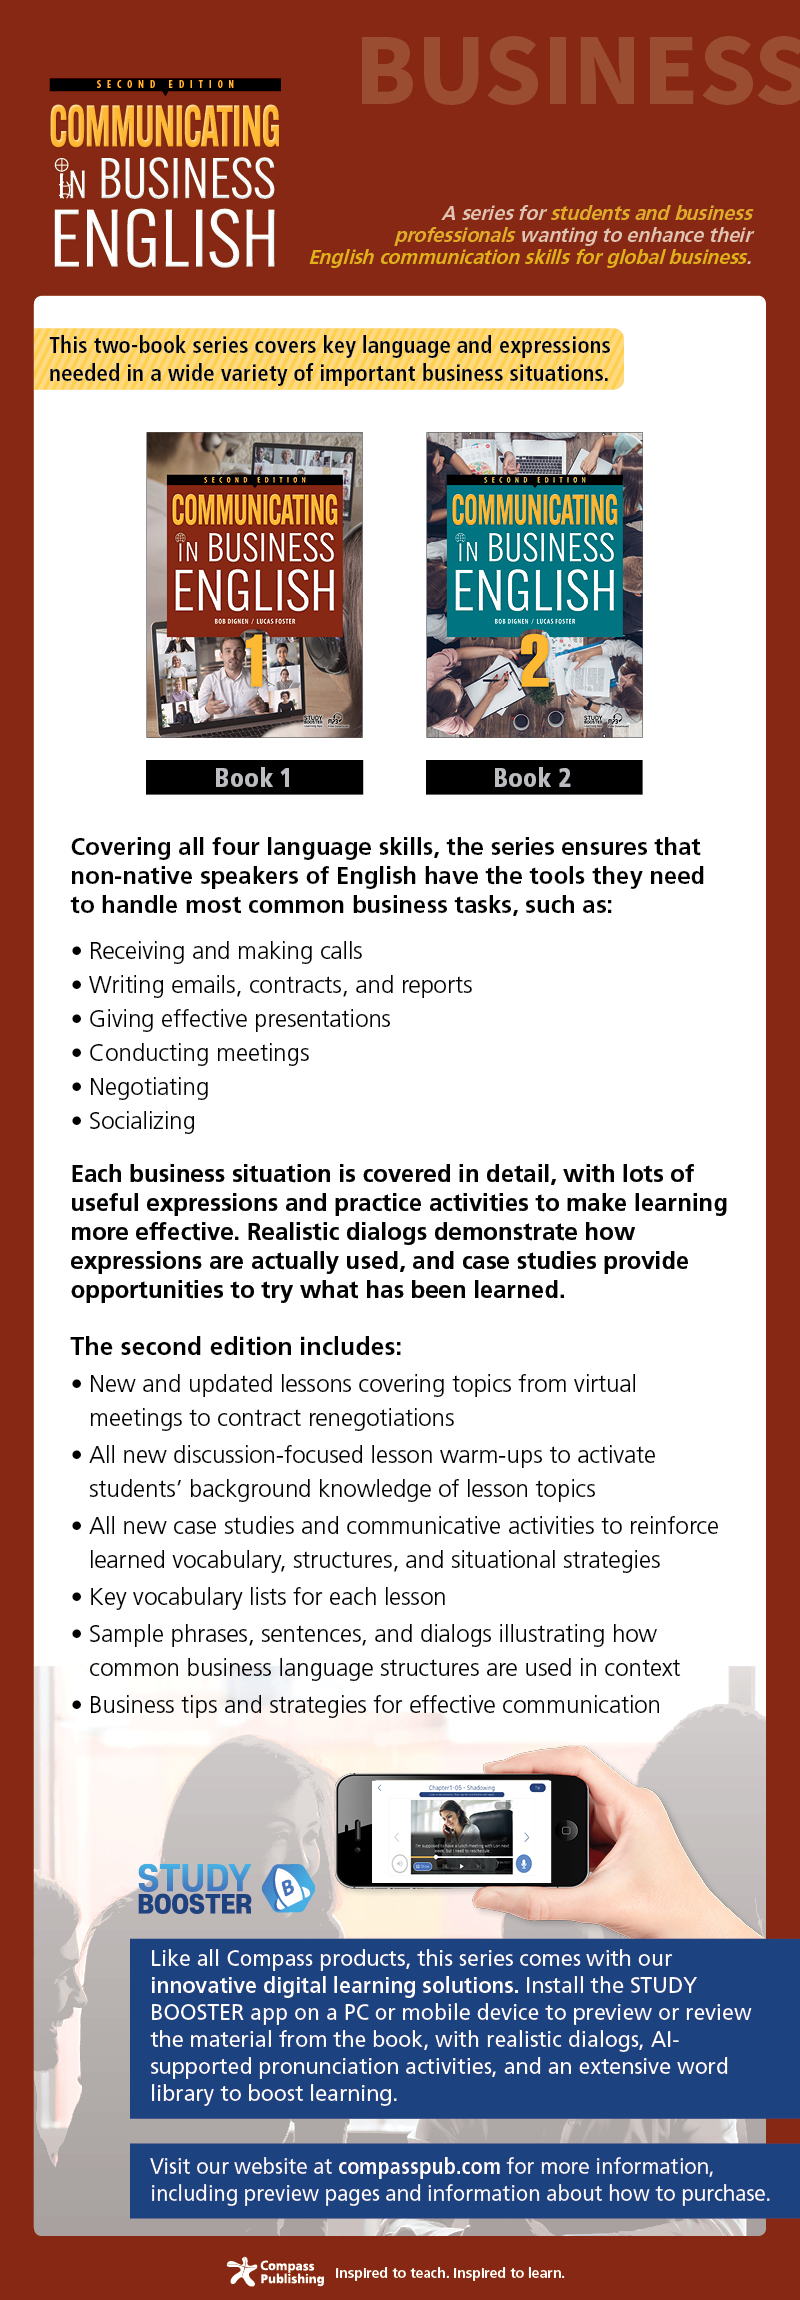 Communicating in Business English, second edition, advertisement